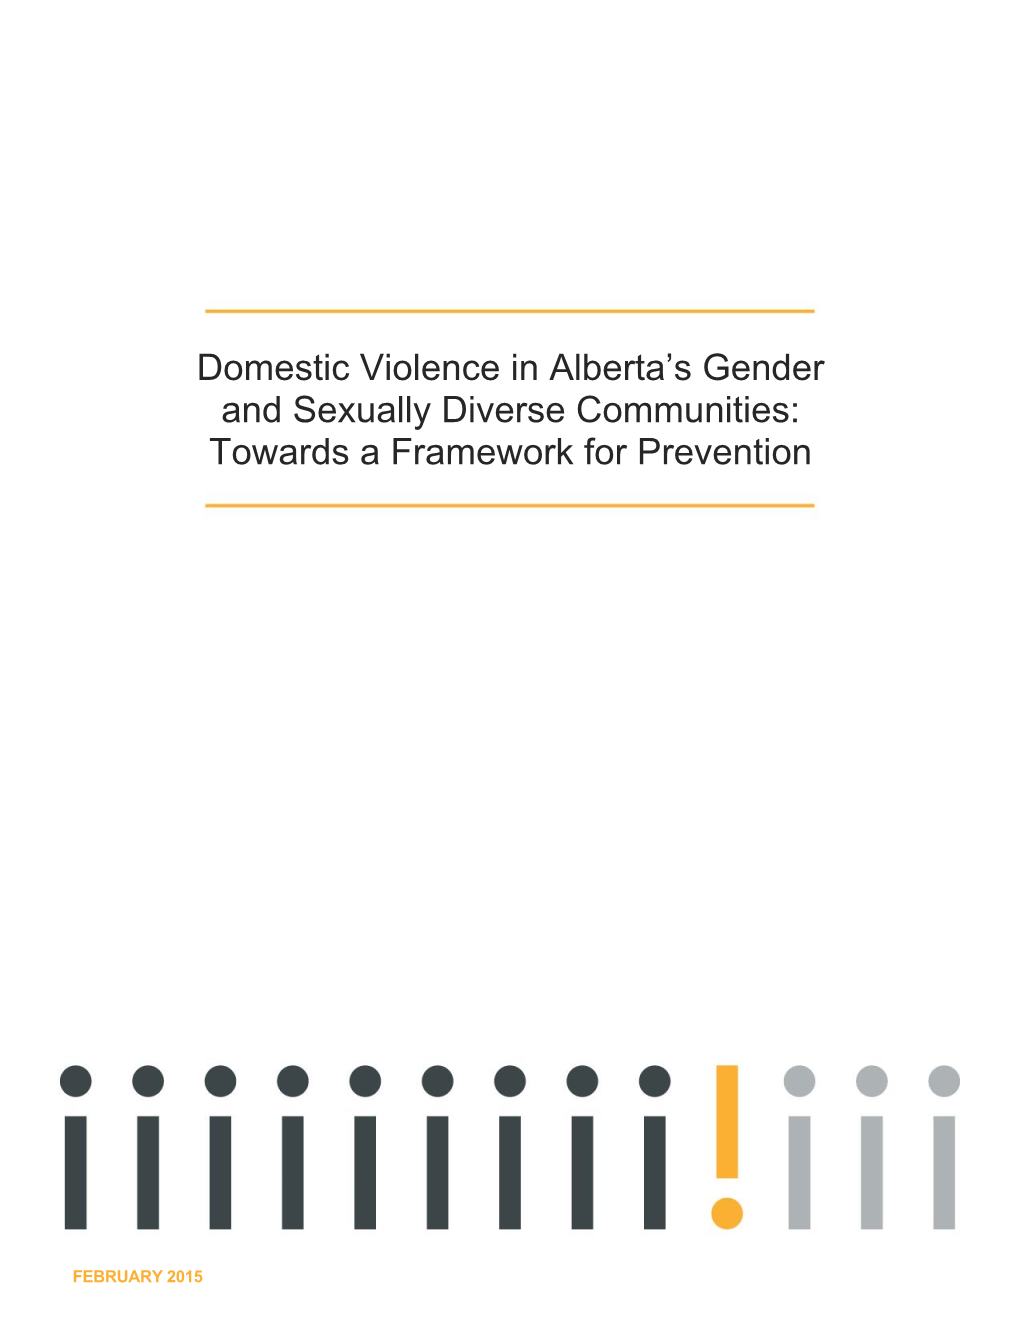 Domestic Violence in Alberta's Gender and Sexually Diverse Communities